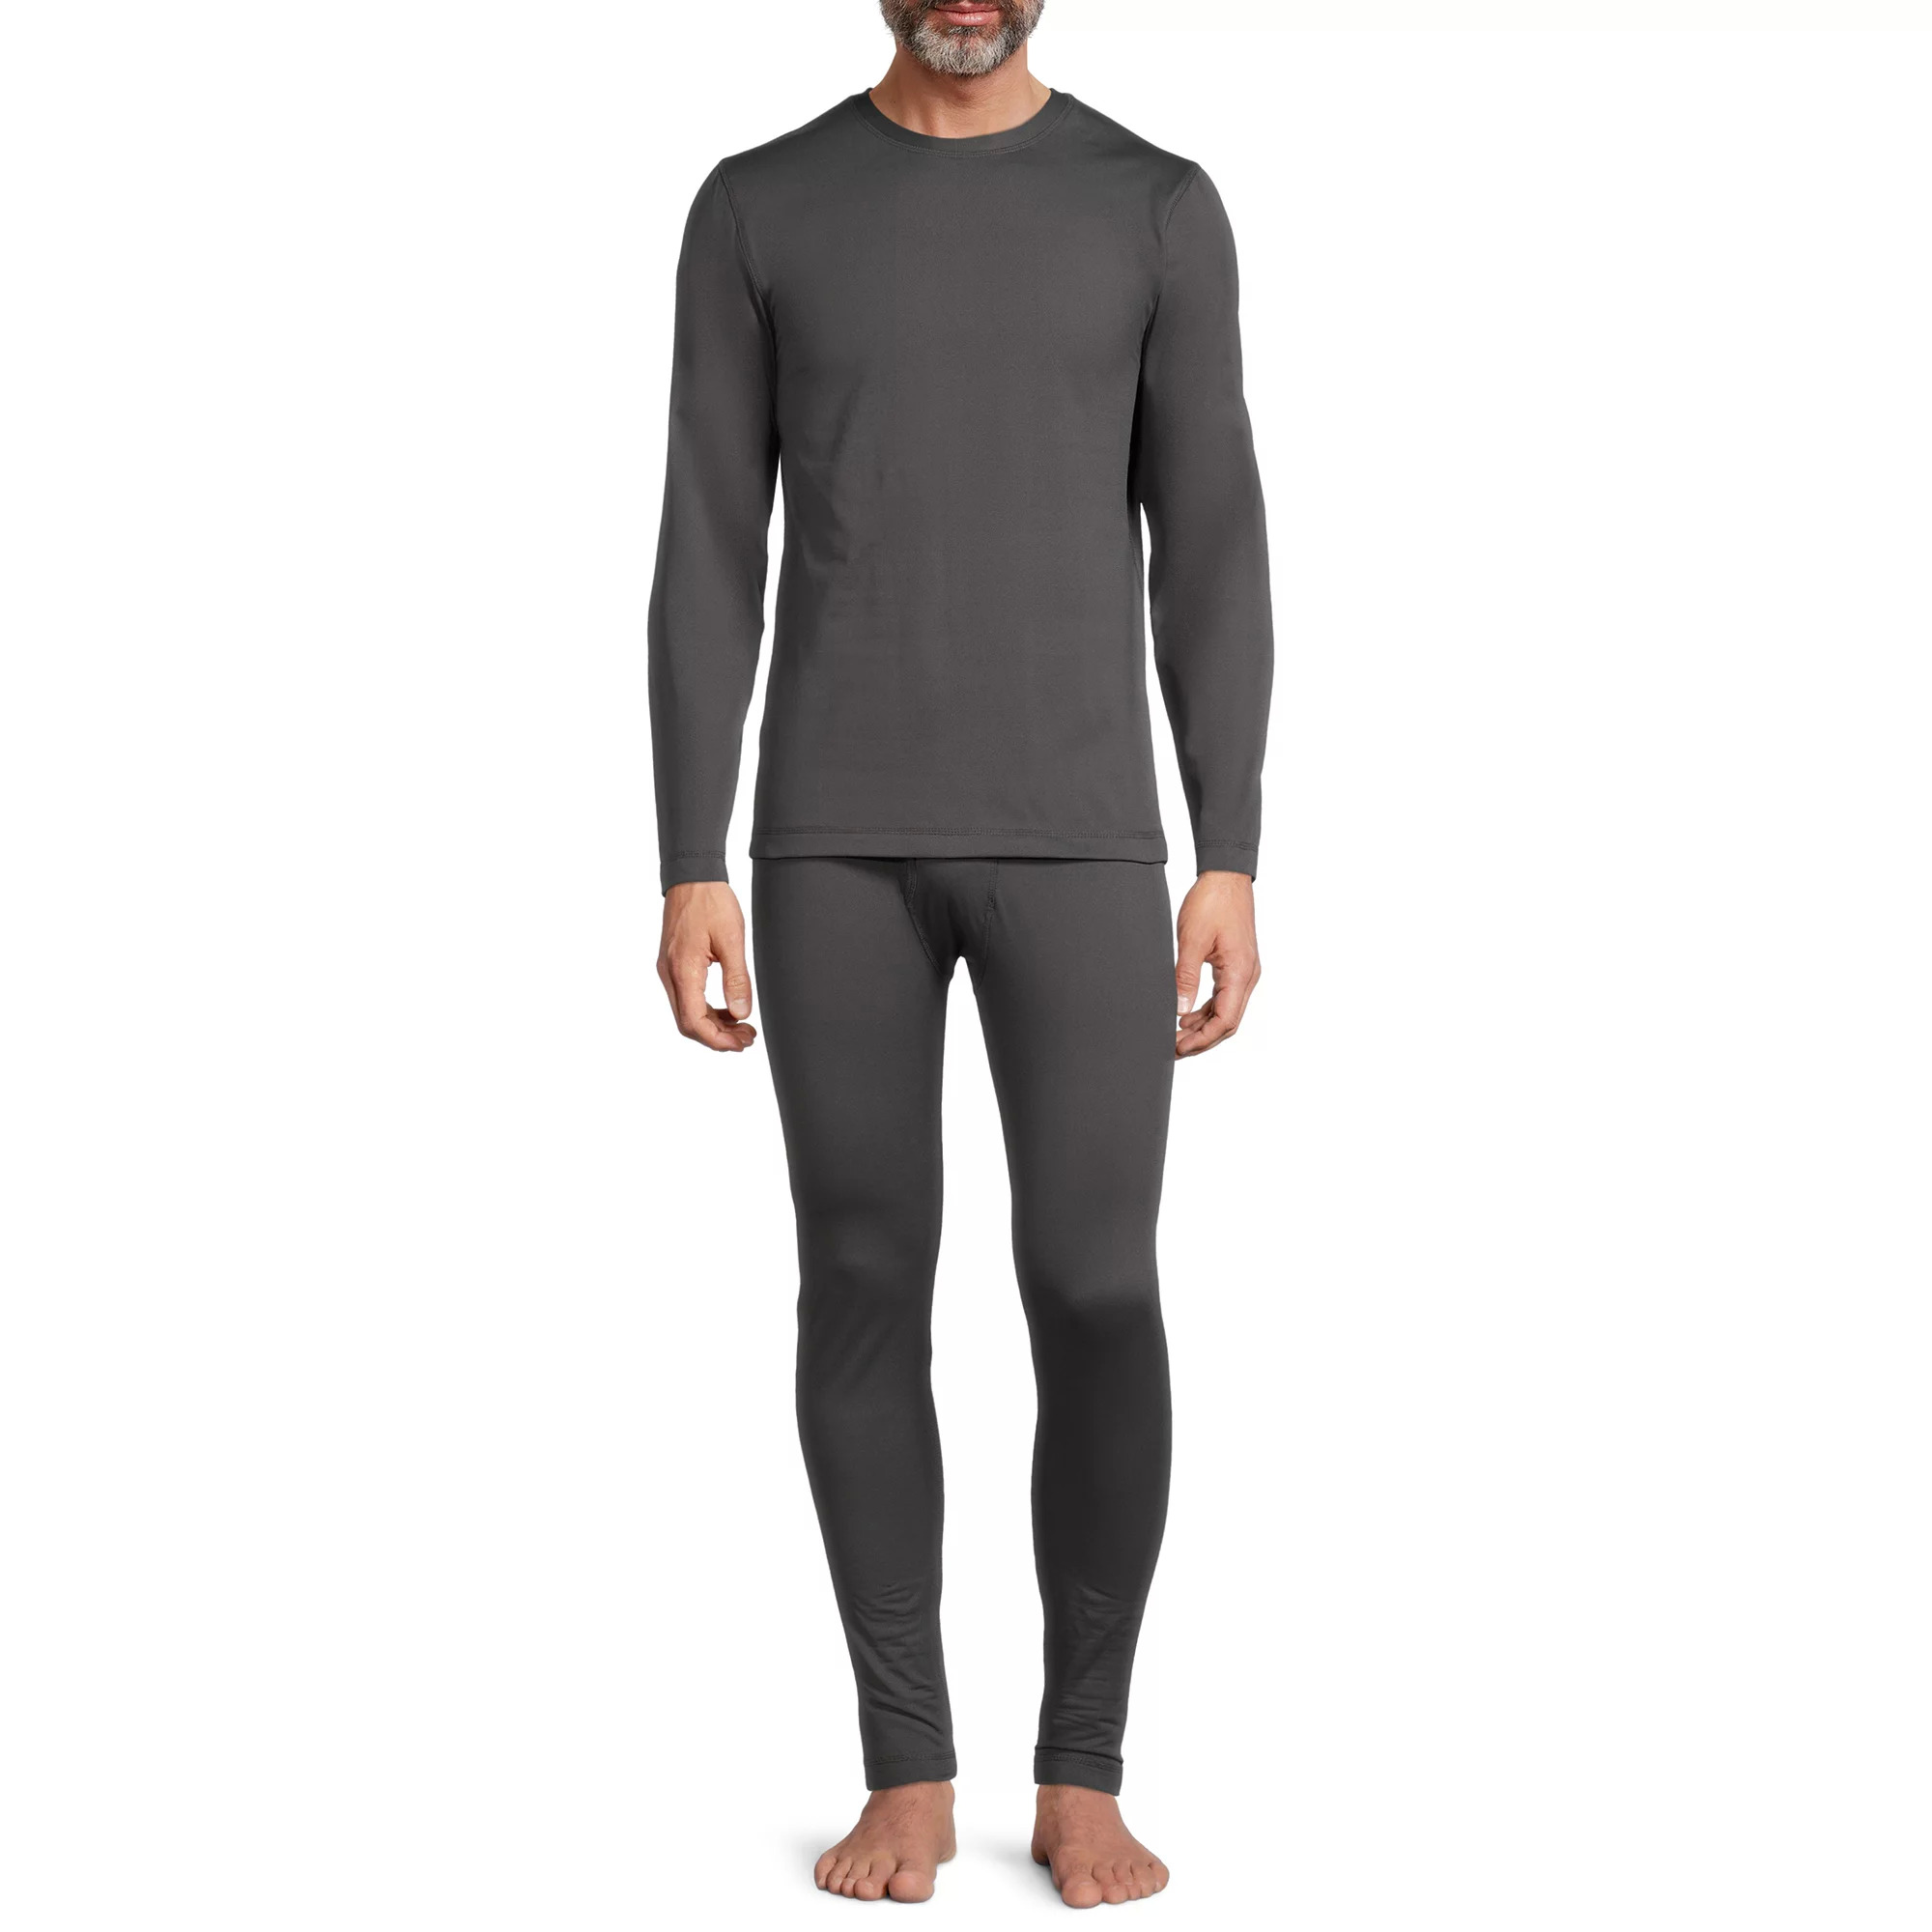 2-Piece Isotoner Men's Brushed Top and Pants Base Layer Set $6.63 + Free Shipping w/ Walmart+ or $35+